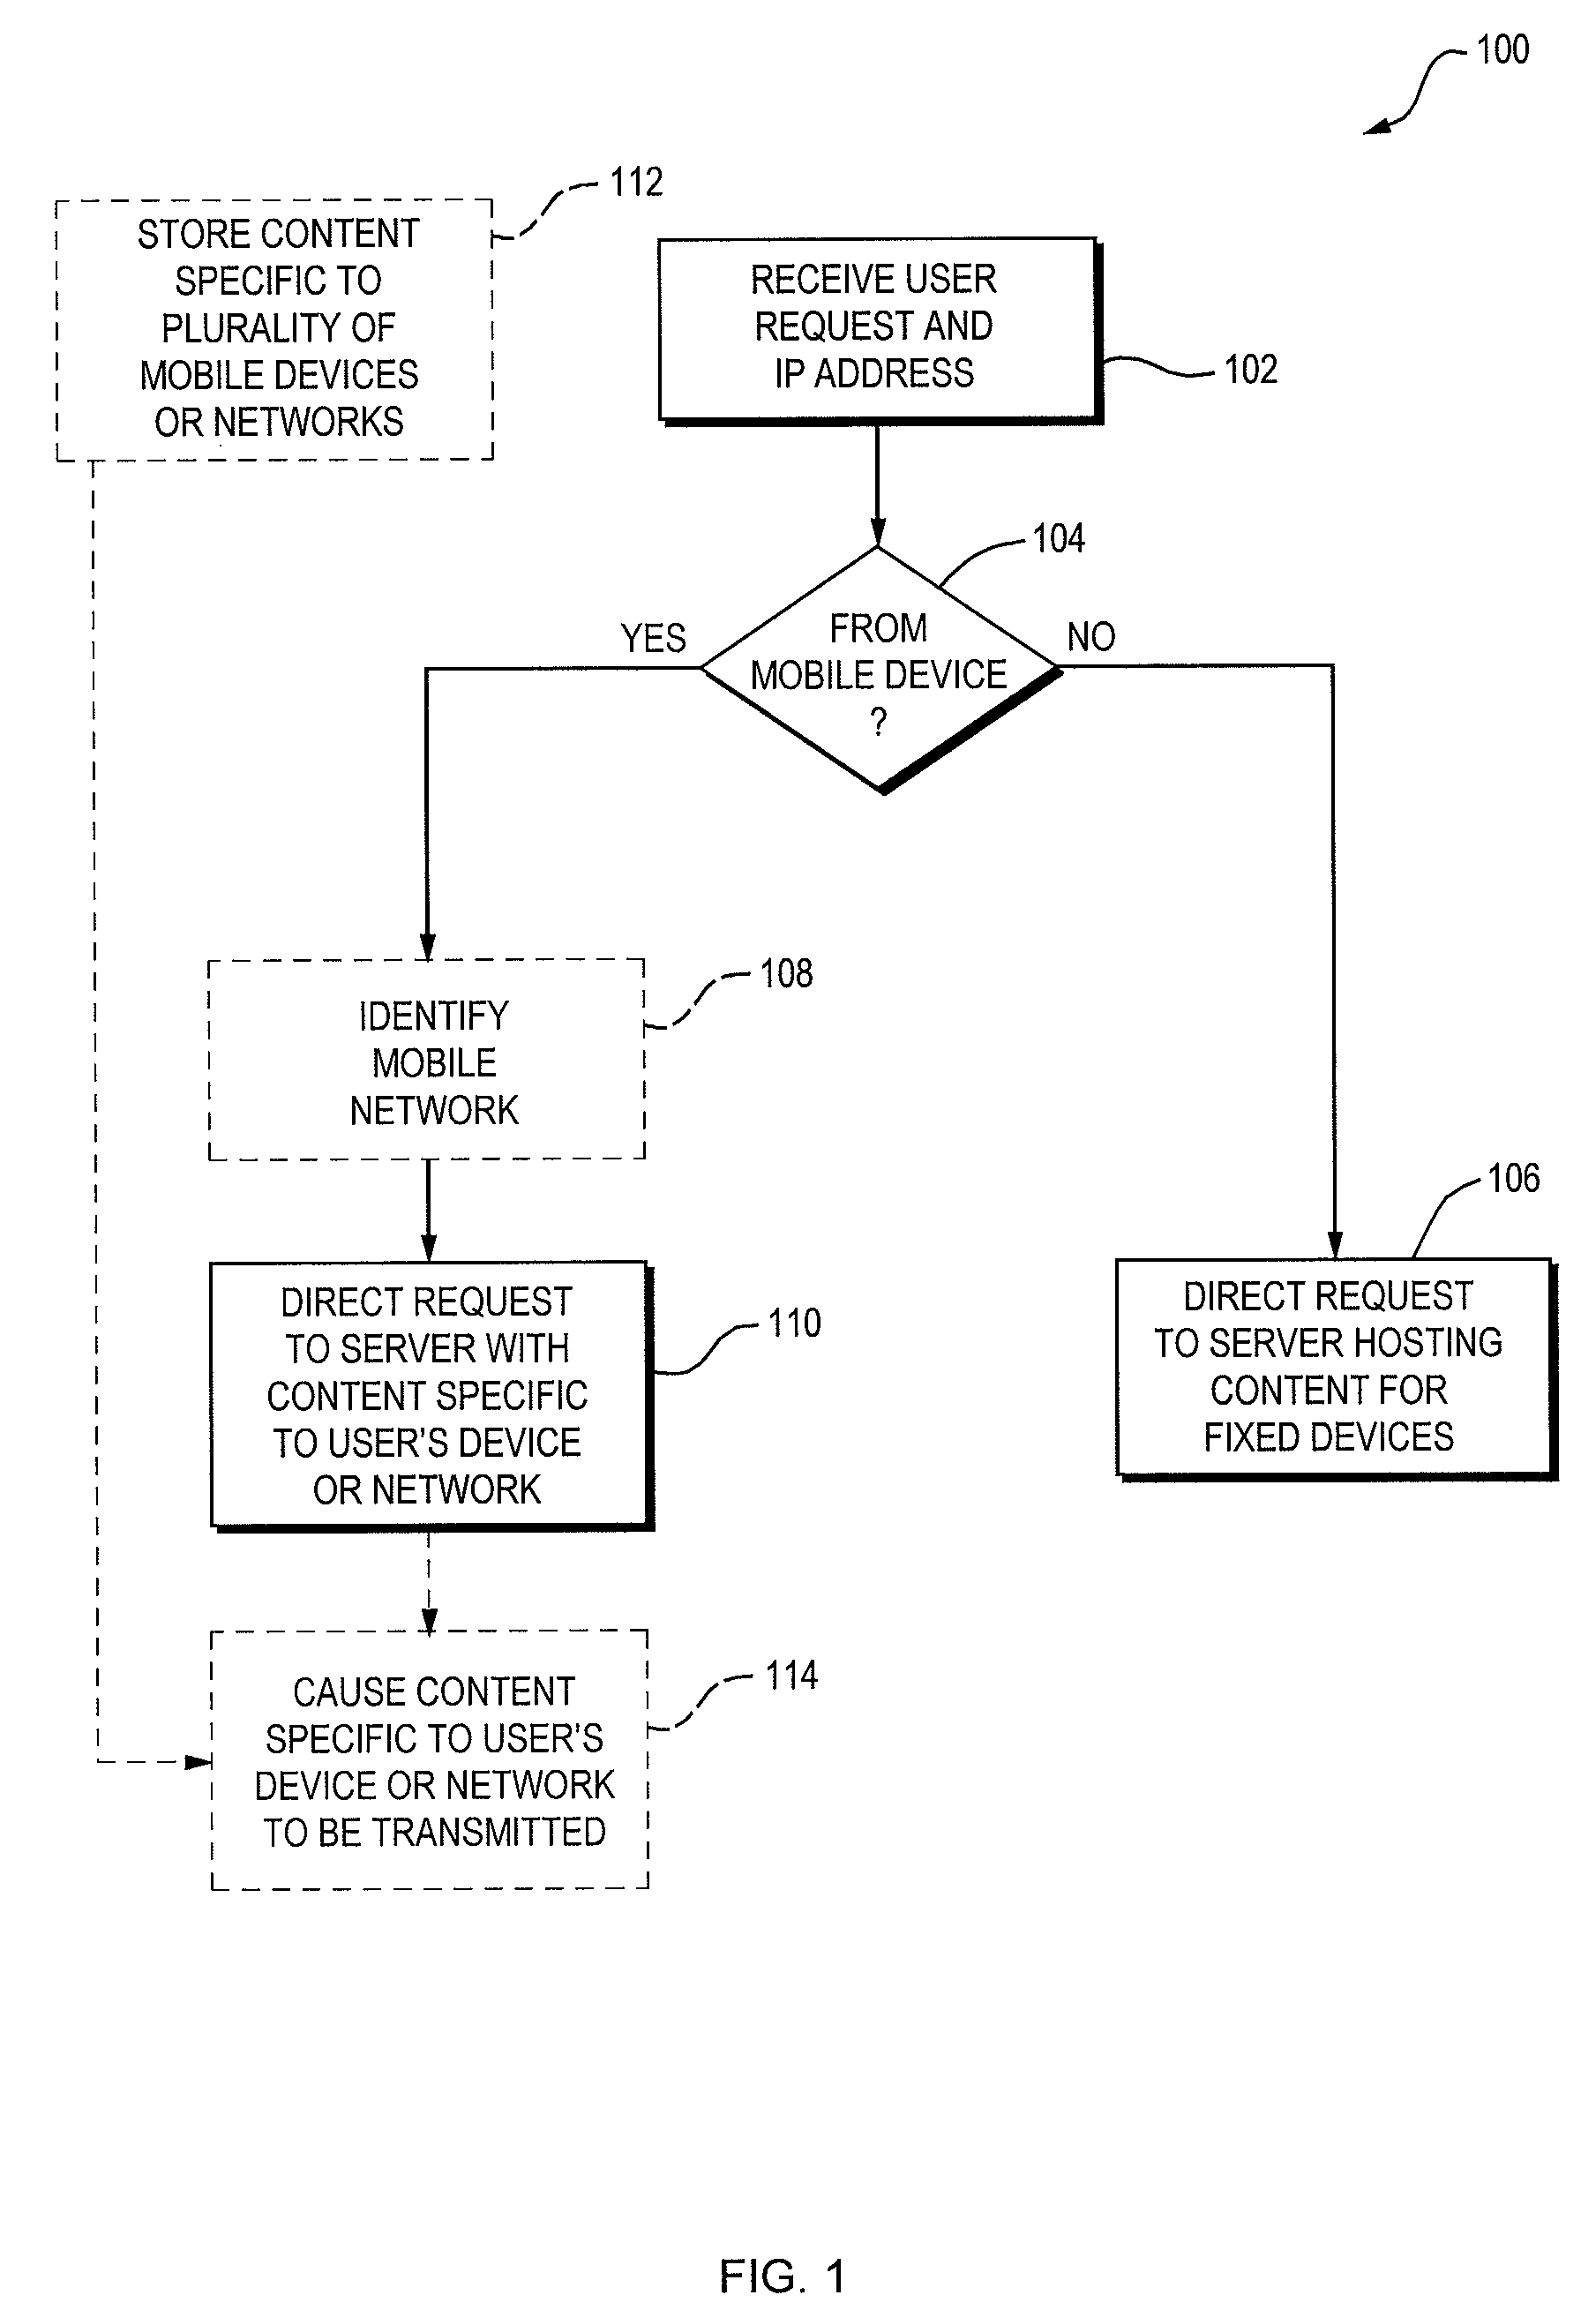 Routing network requests based on requesting device characteristics